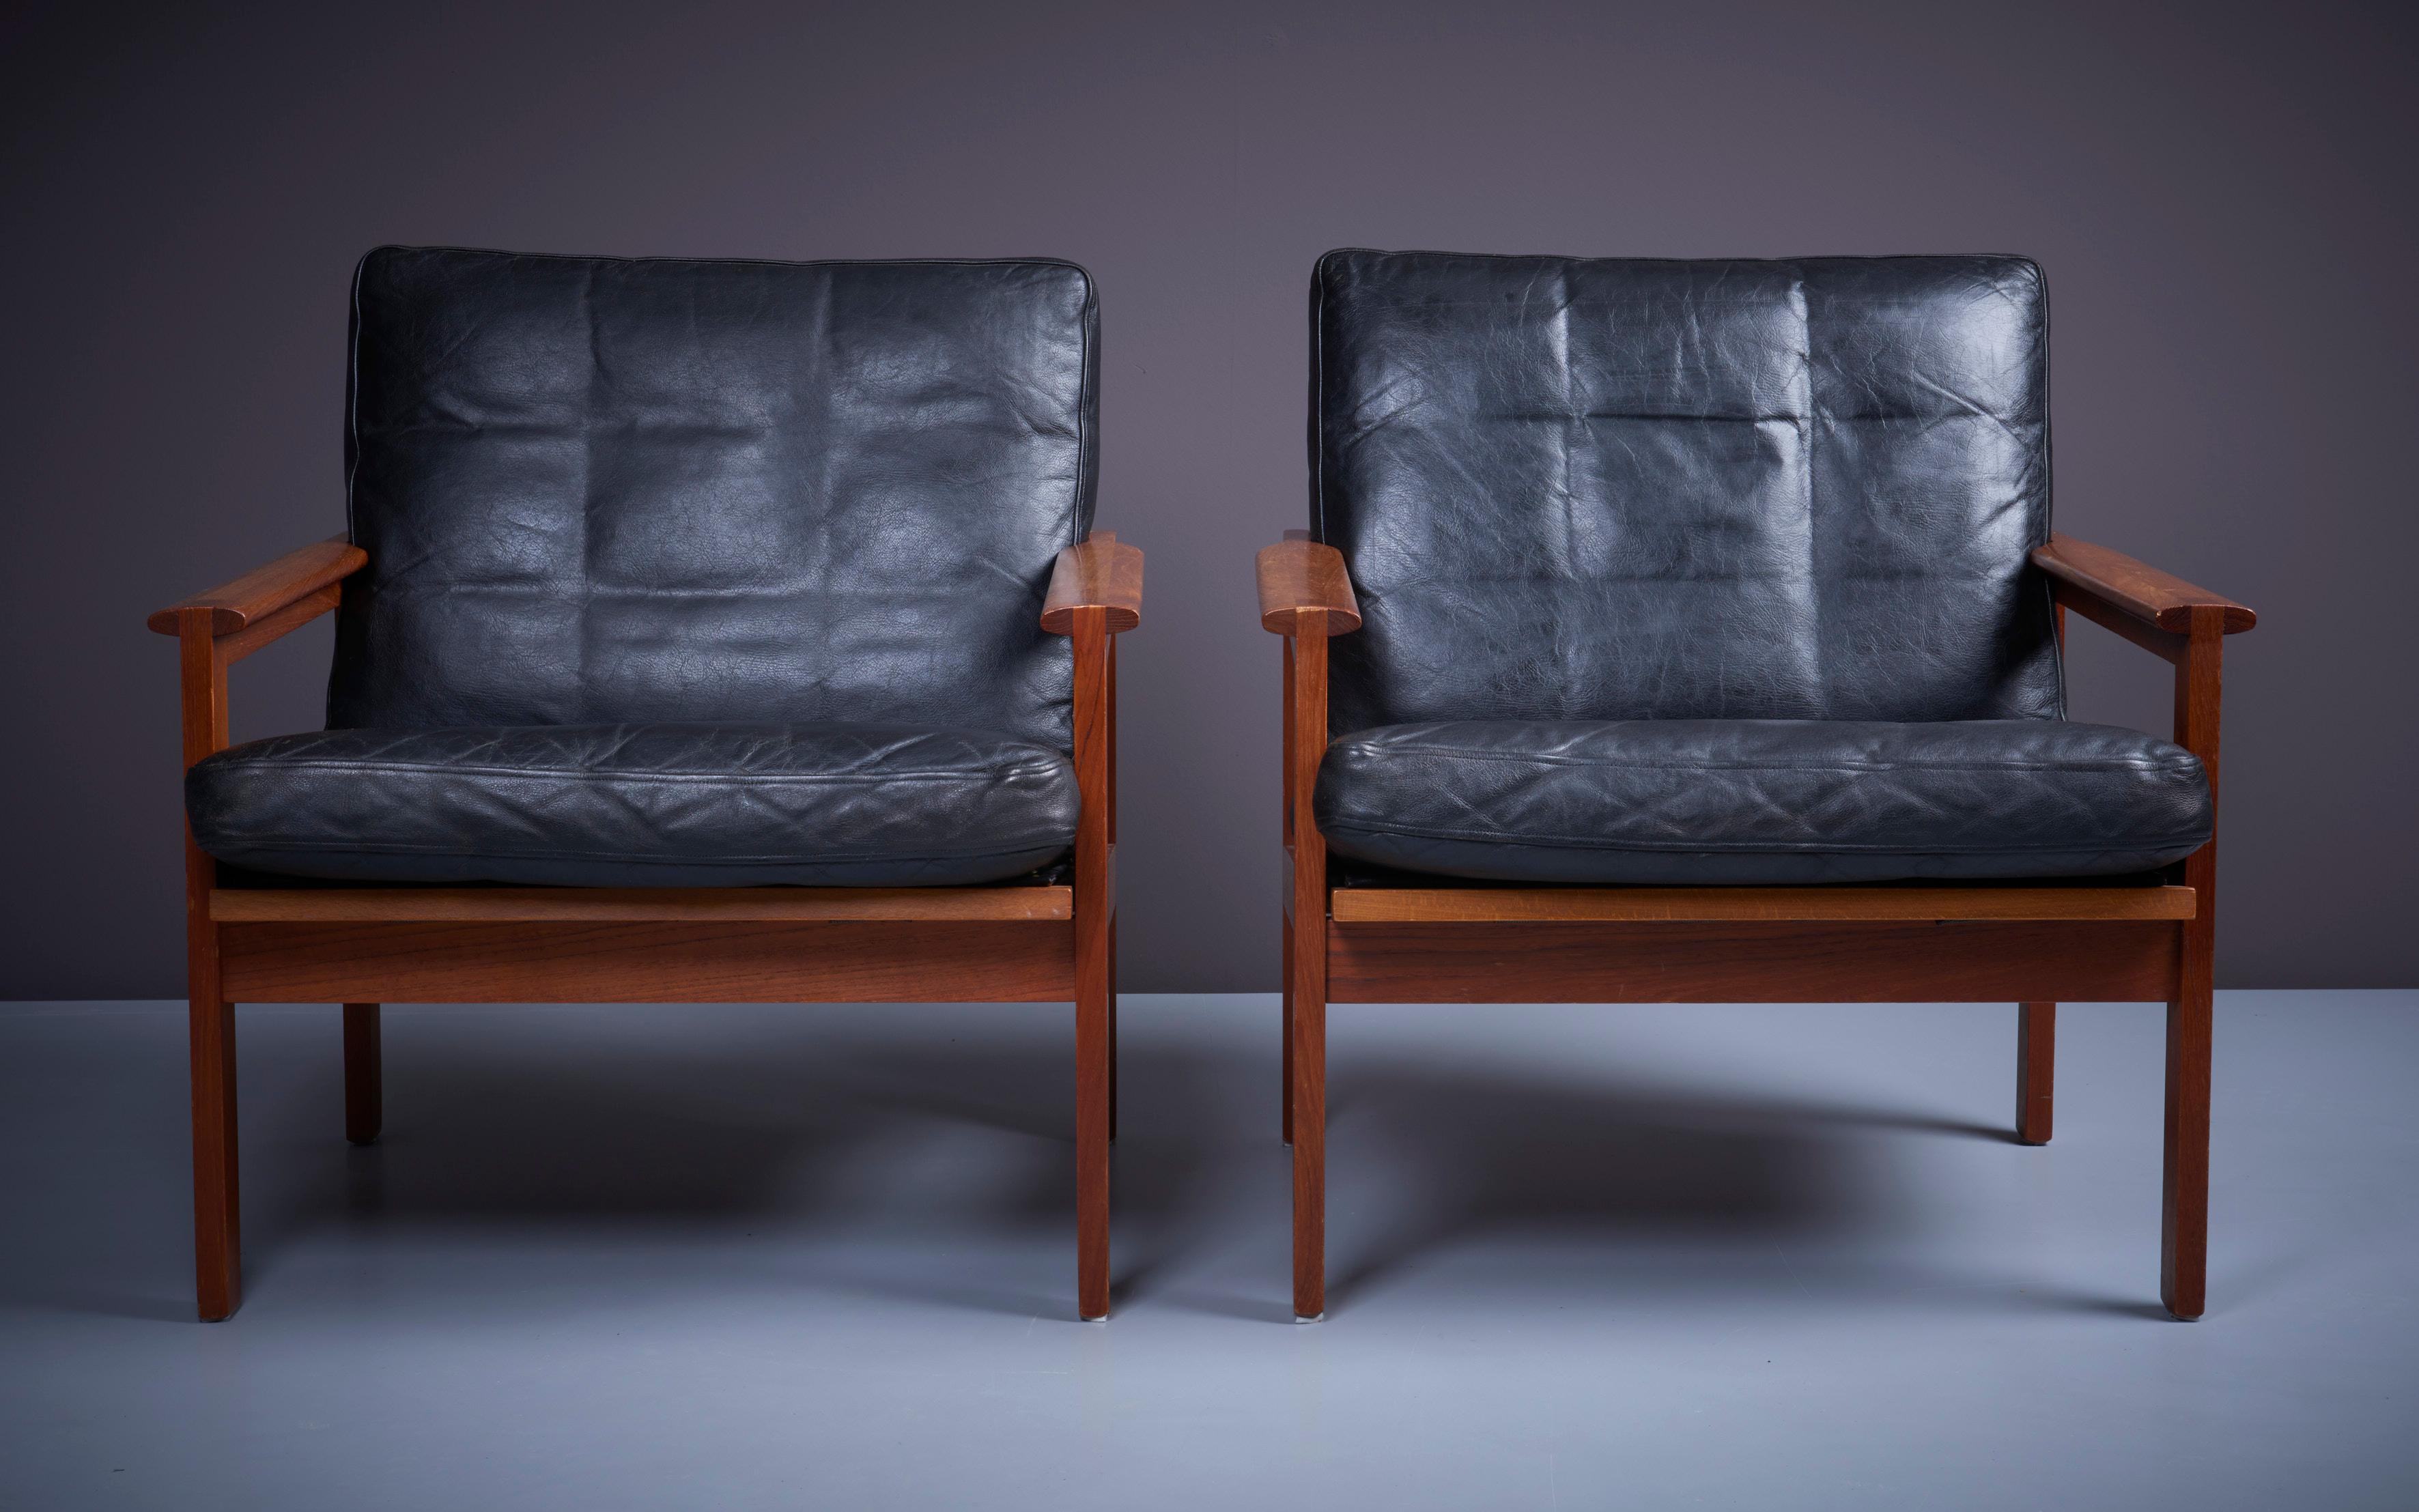 Original condition 'Capella' set of 2 armchairs by Danish furniture designer Kristian Illum Wikkelsø (1919-1999) for Niels Eilersen. Outstanding quality with solid teak frames and beautiful black leather seat and cushions in original condition. We